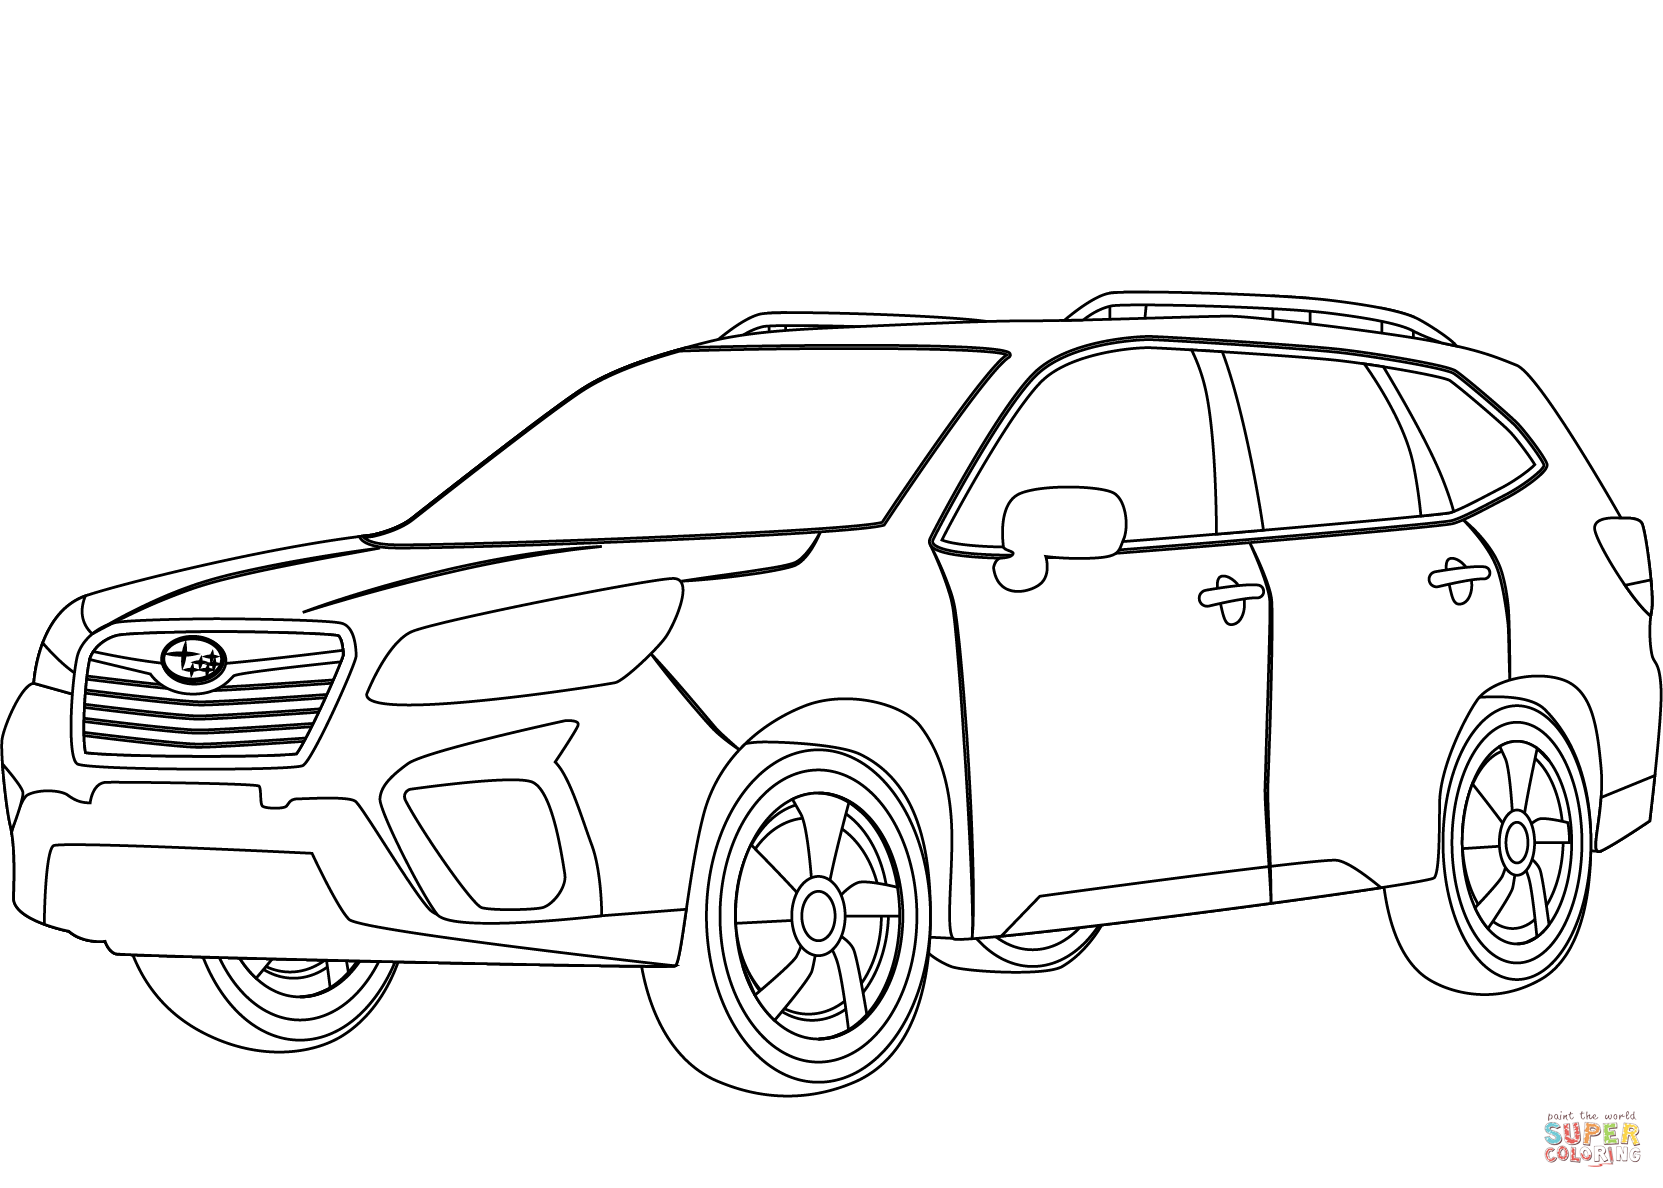 Subaru forester coloring page free printable coloring pages subaru wrx race car coloring pages cars coloring pages